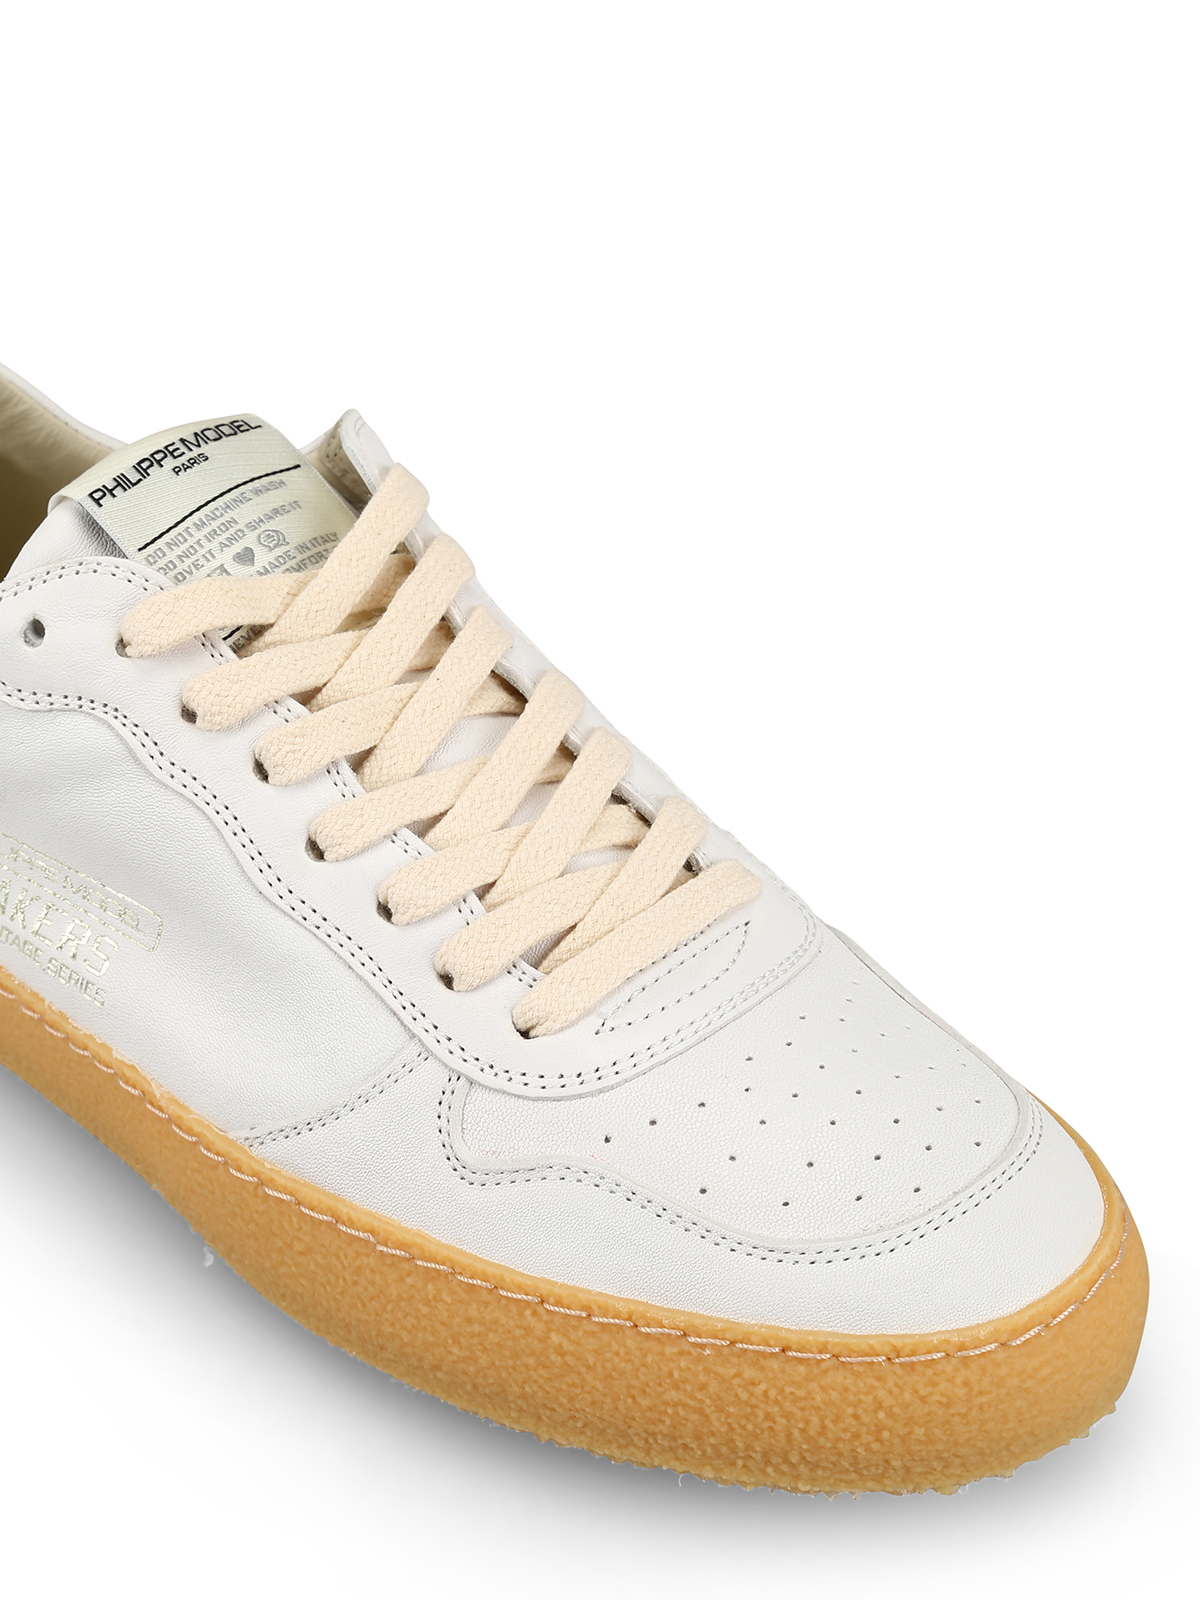 Philippe Model - Sneaker bianche Lakers Vintage series - sneakers - LVLUWW24